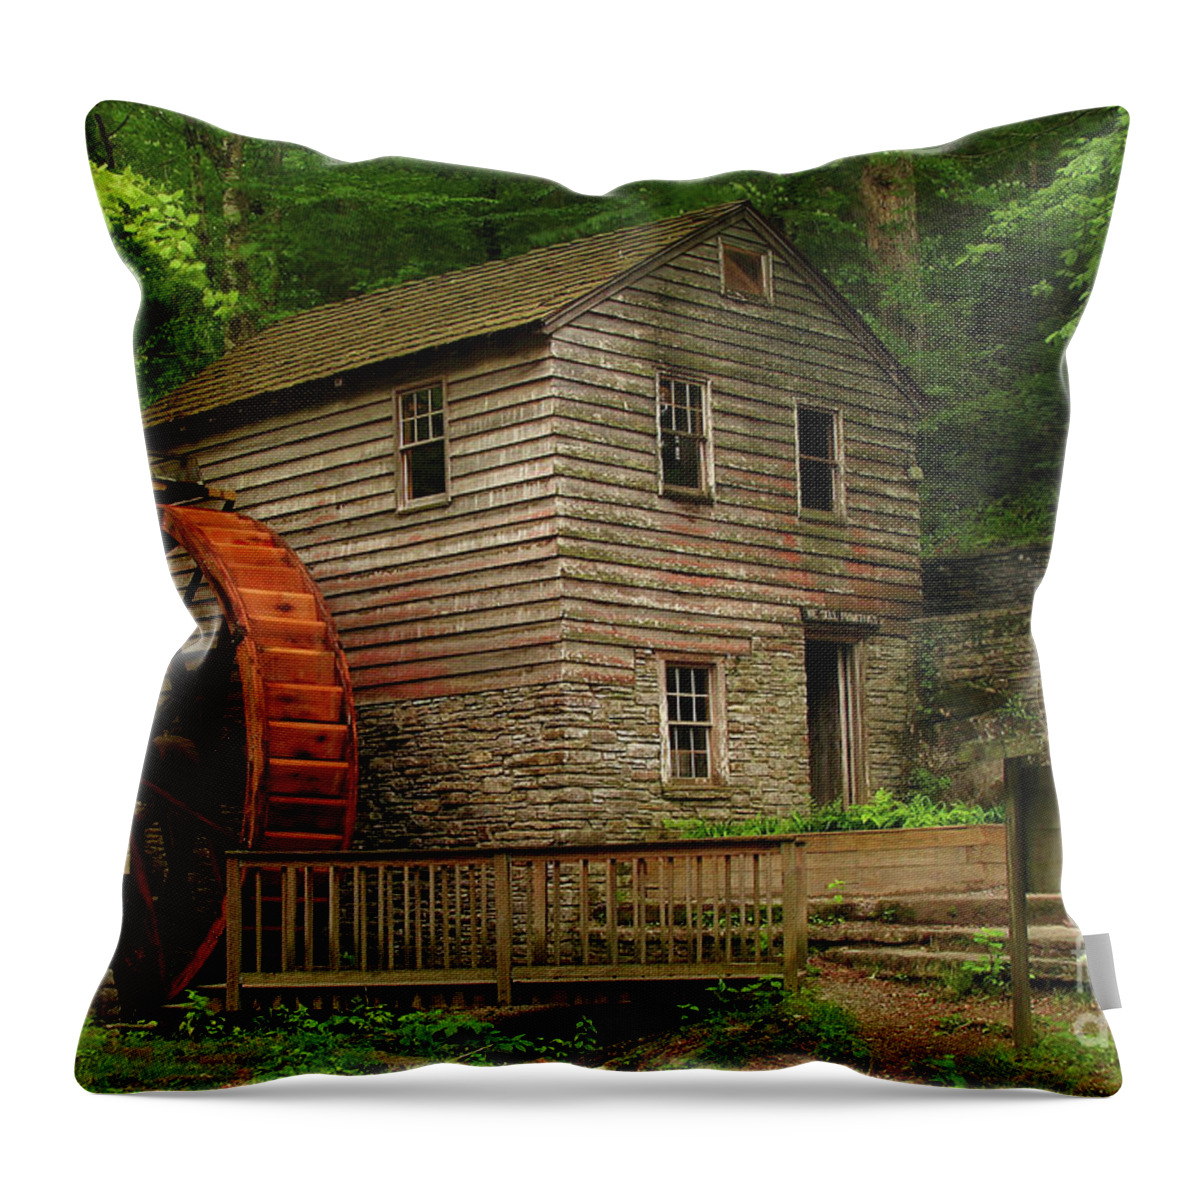 Old Throw Pillow featuring the photograph Rice Grist Mill by Douglas Stucky